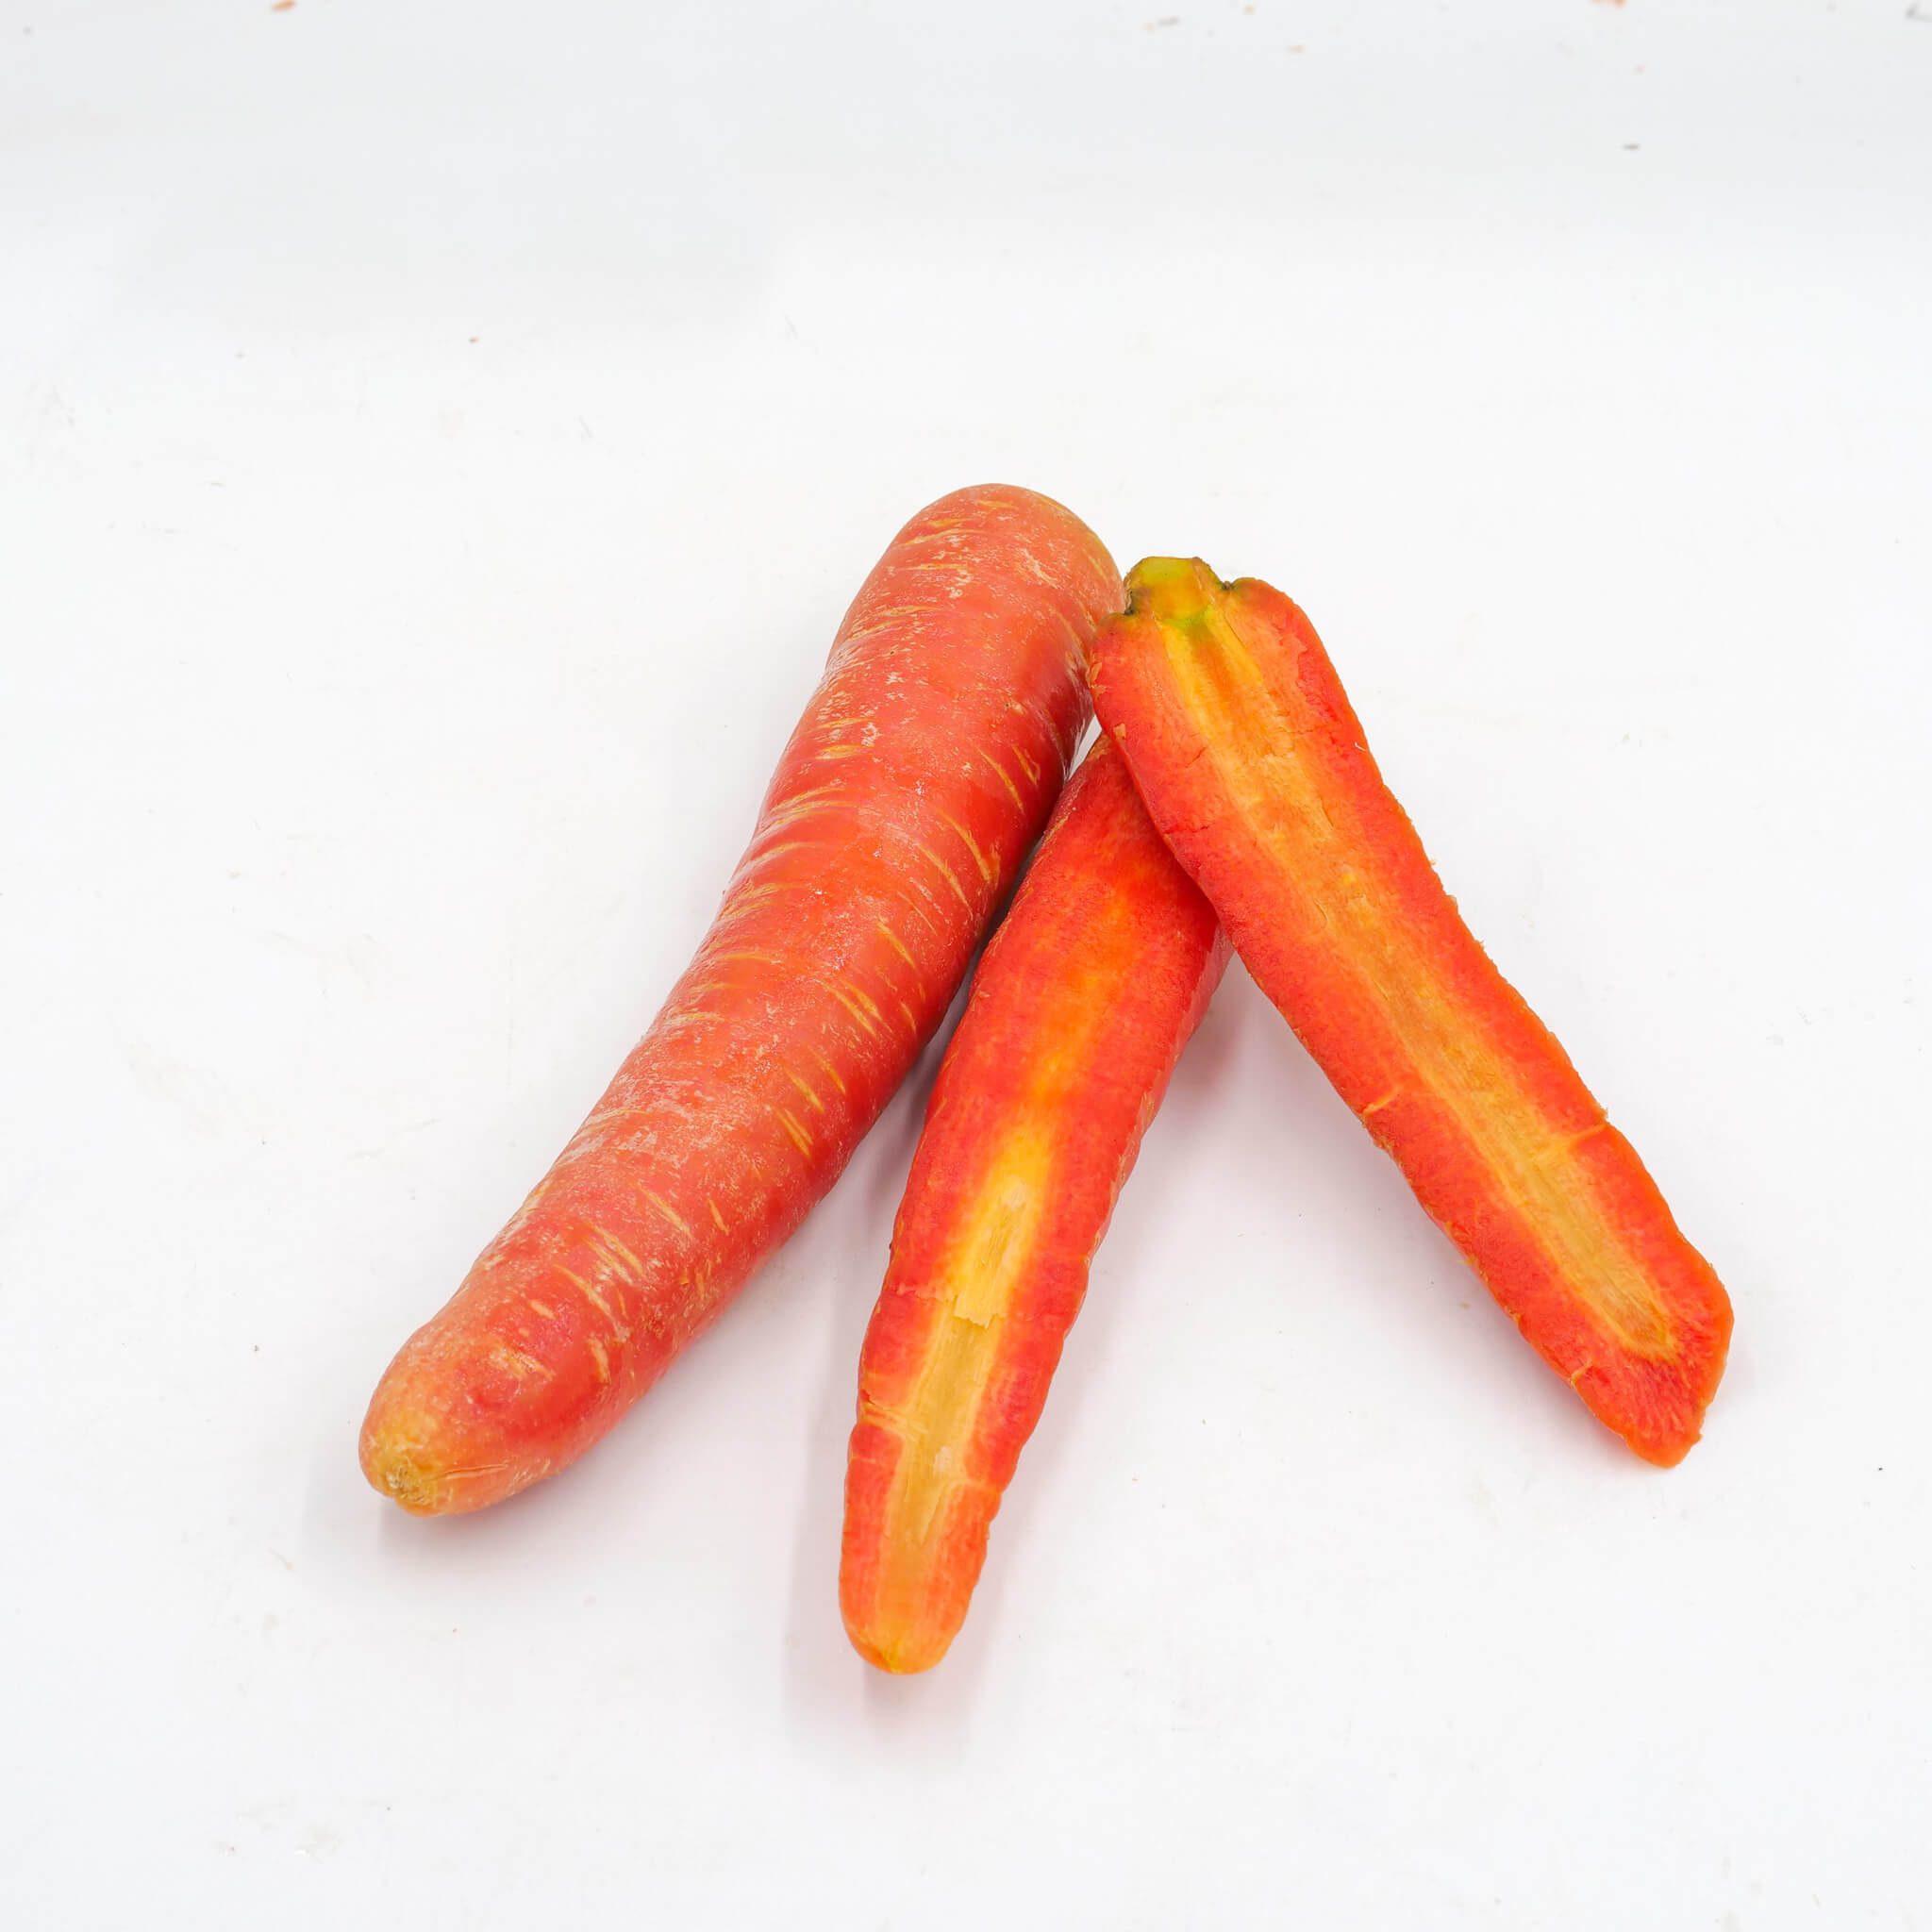 La Légumière, the specialist in Breton and seasonal vegetables! Red carrots